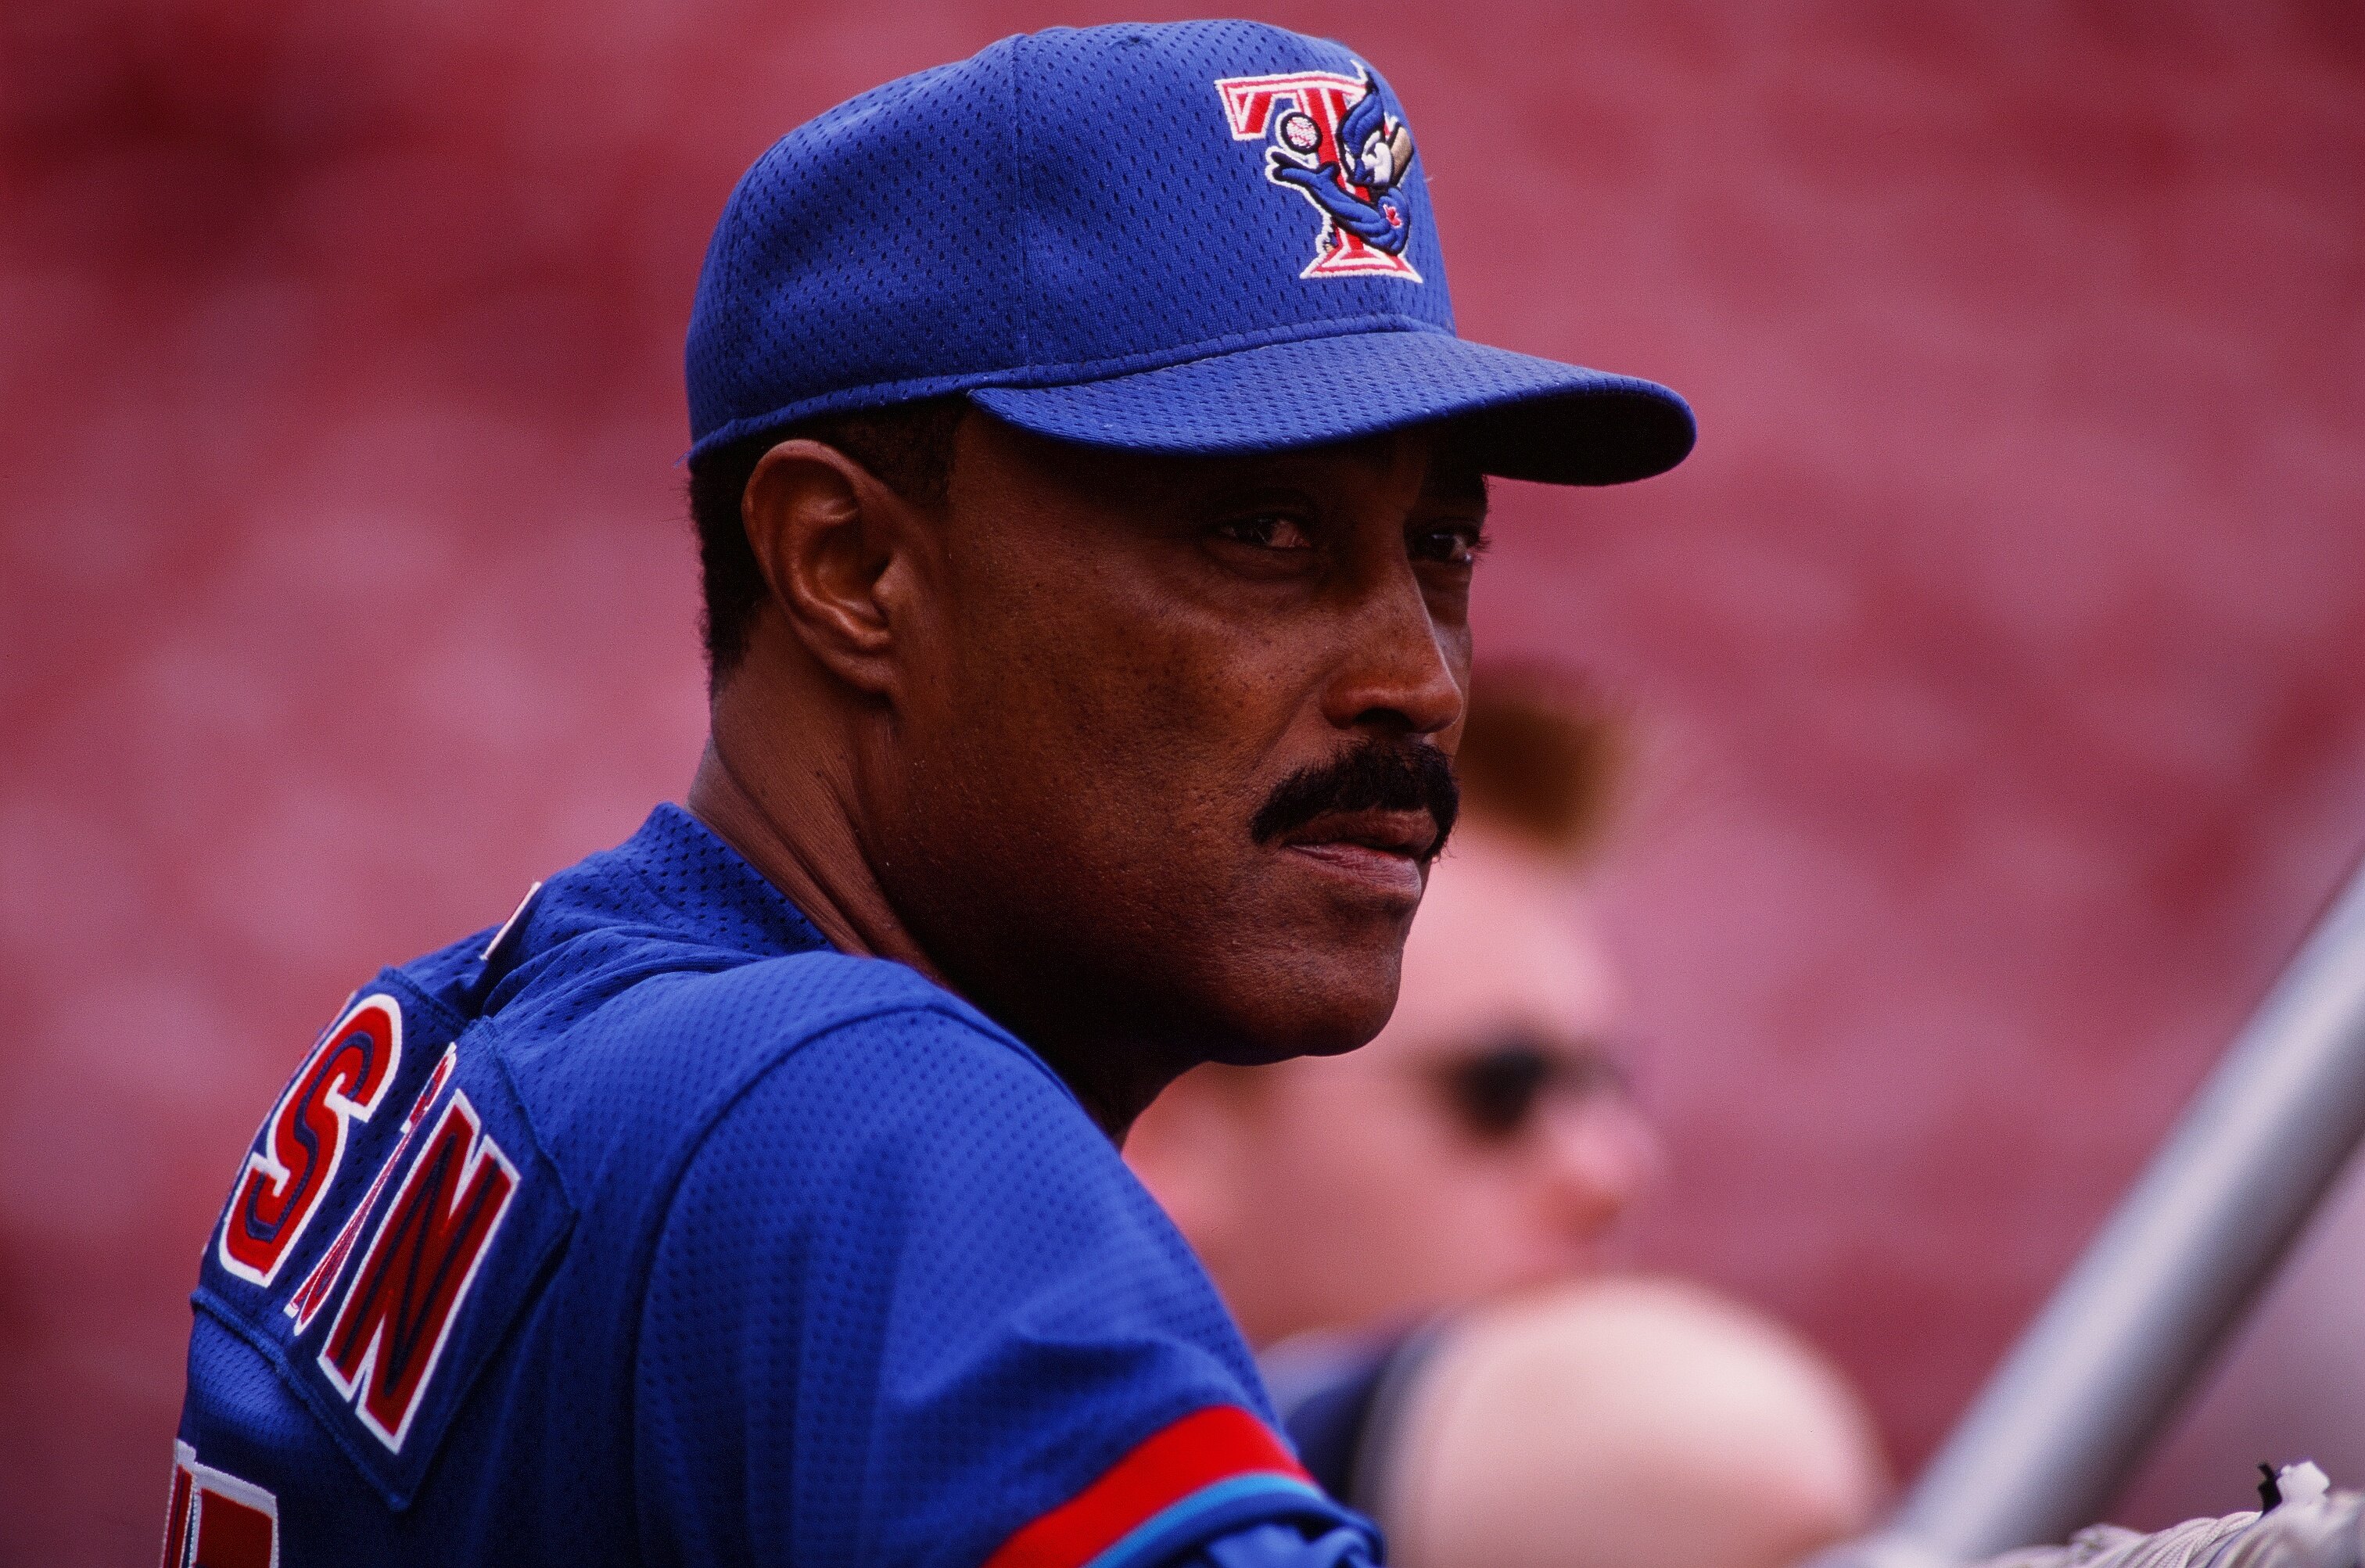 Cito Gaston of the Toronto Blue Jays looks on from the dugout in 2000